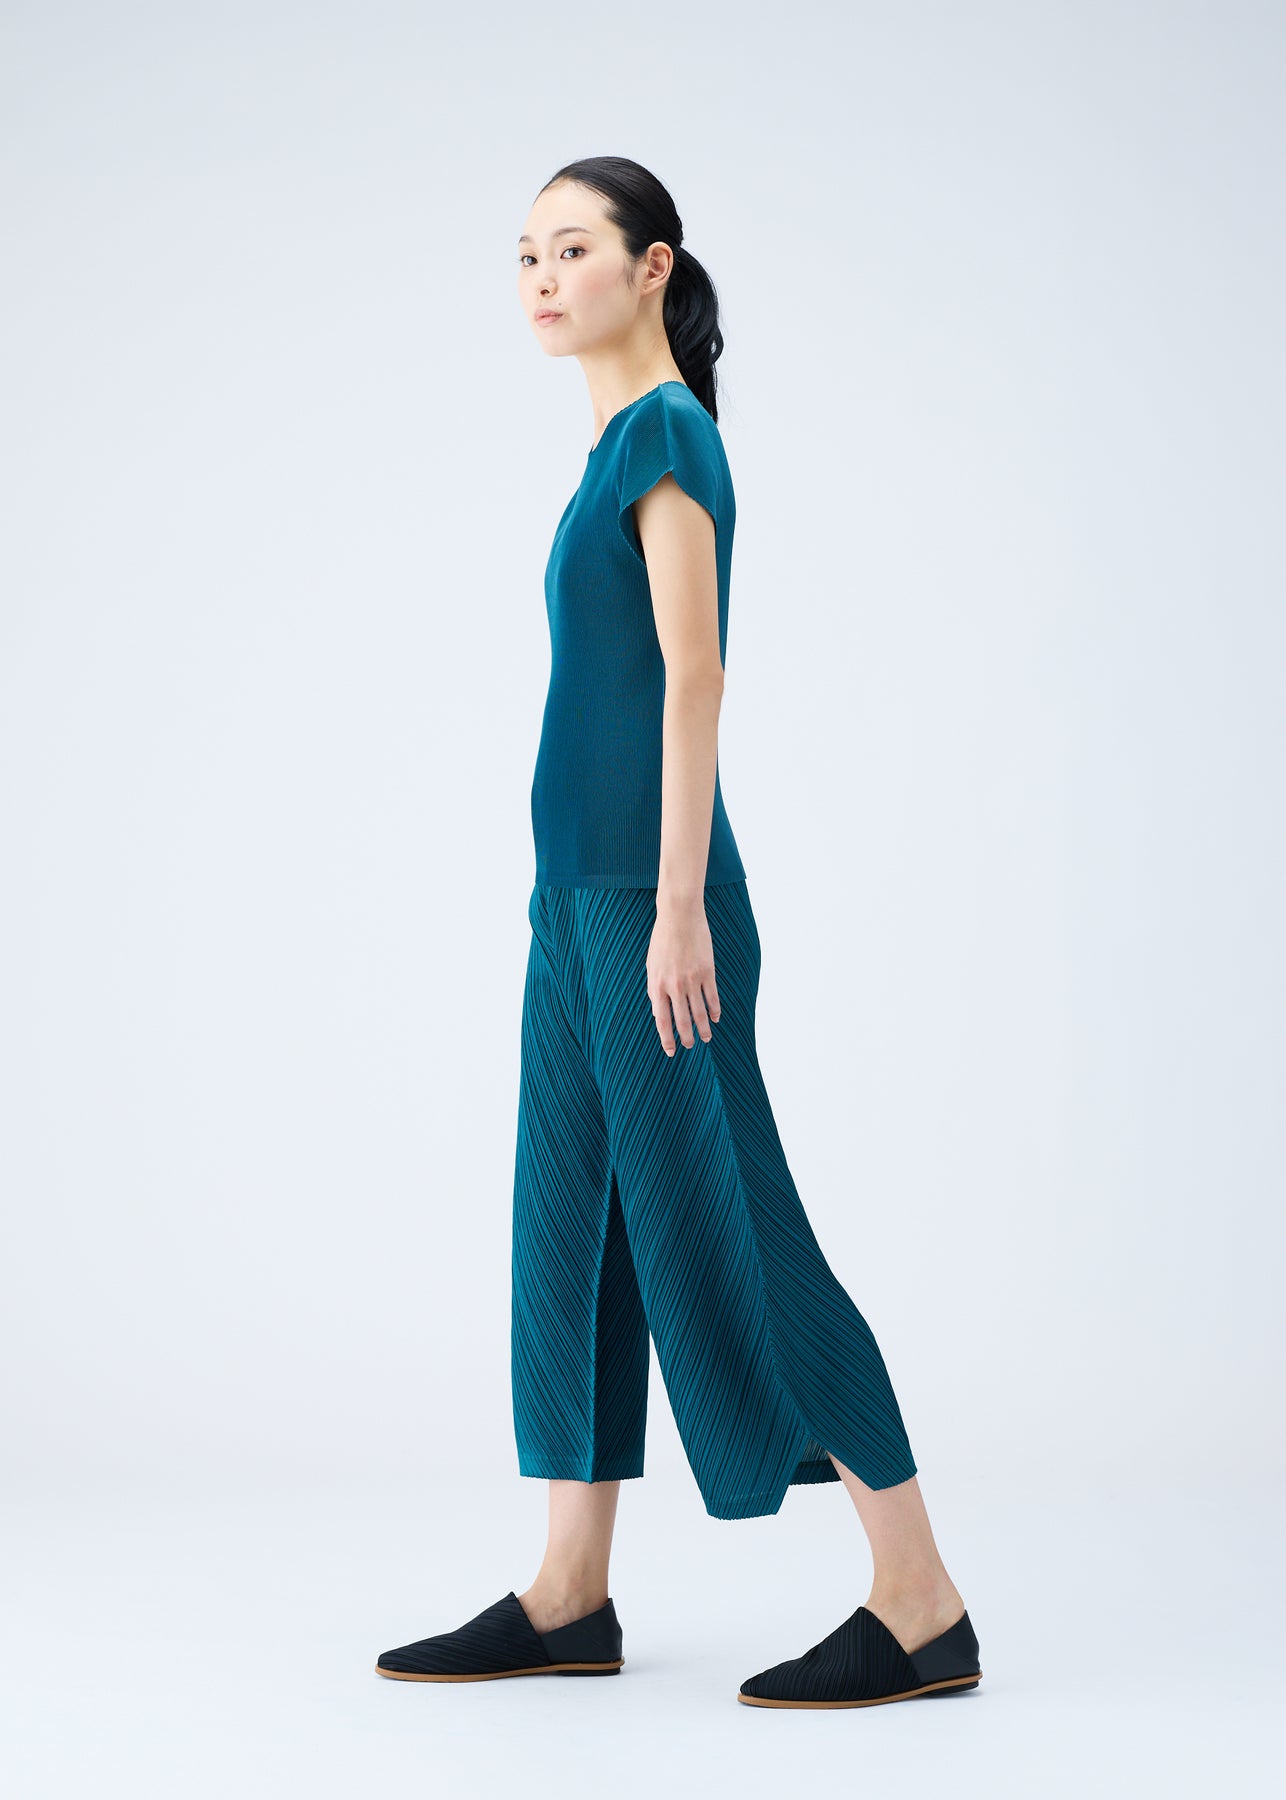 MIST JULY TOP | The official ISSEY MIYAKE ONLINE STORE | ISSEY